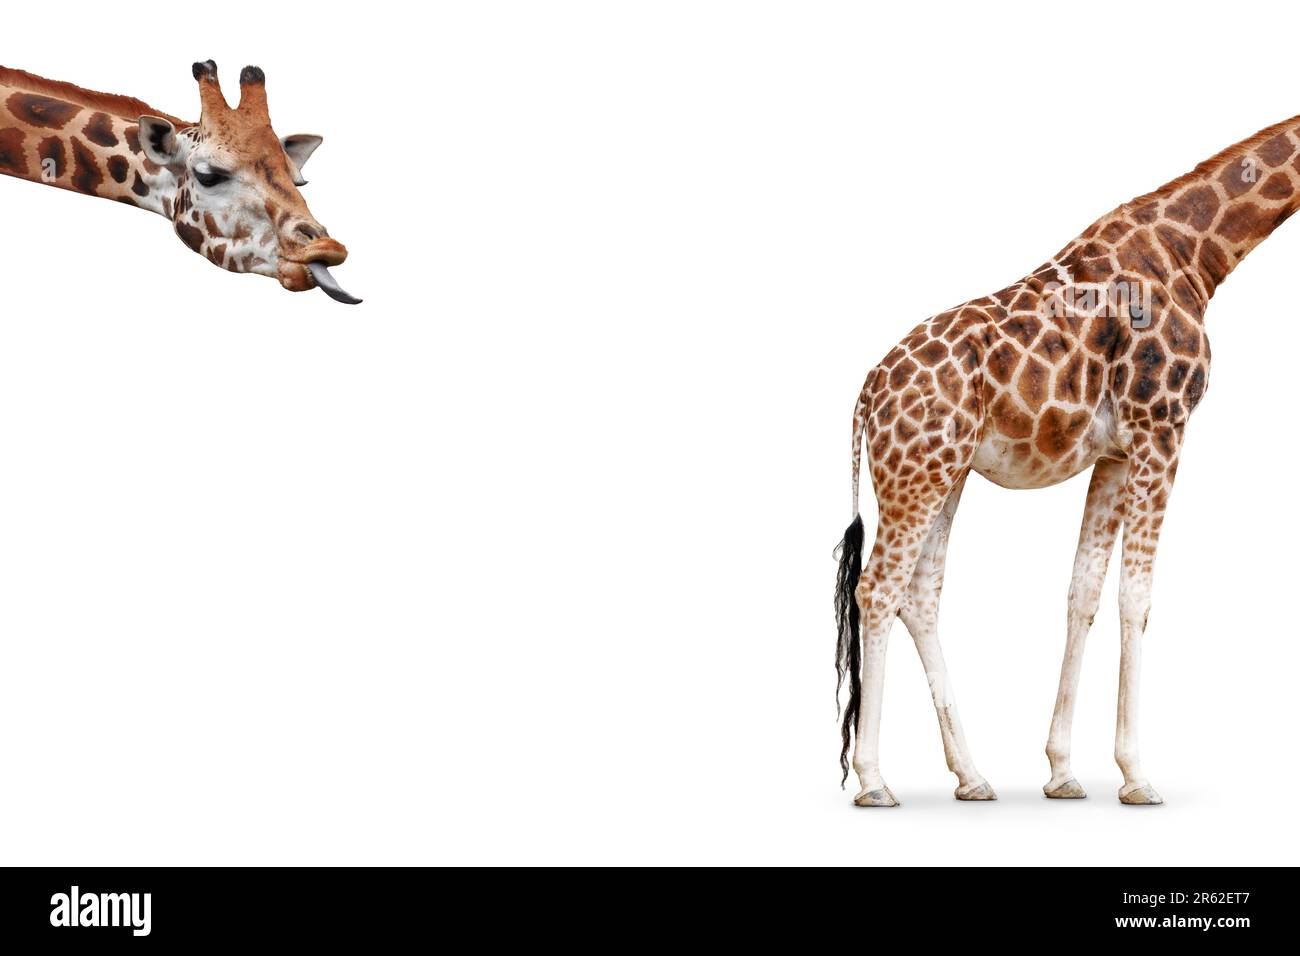 Funny giraffe concept with separate head and body isolated on white background. Stock Photo